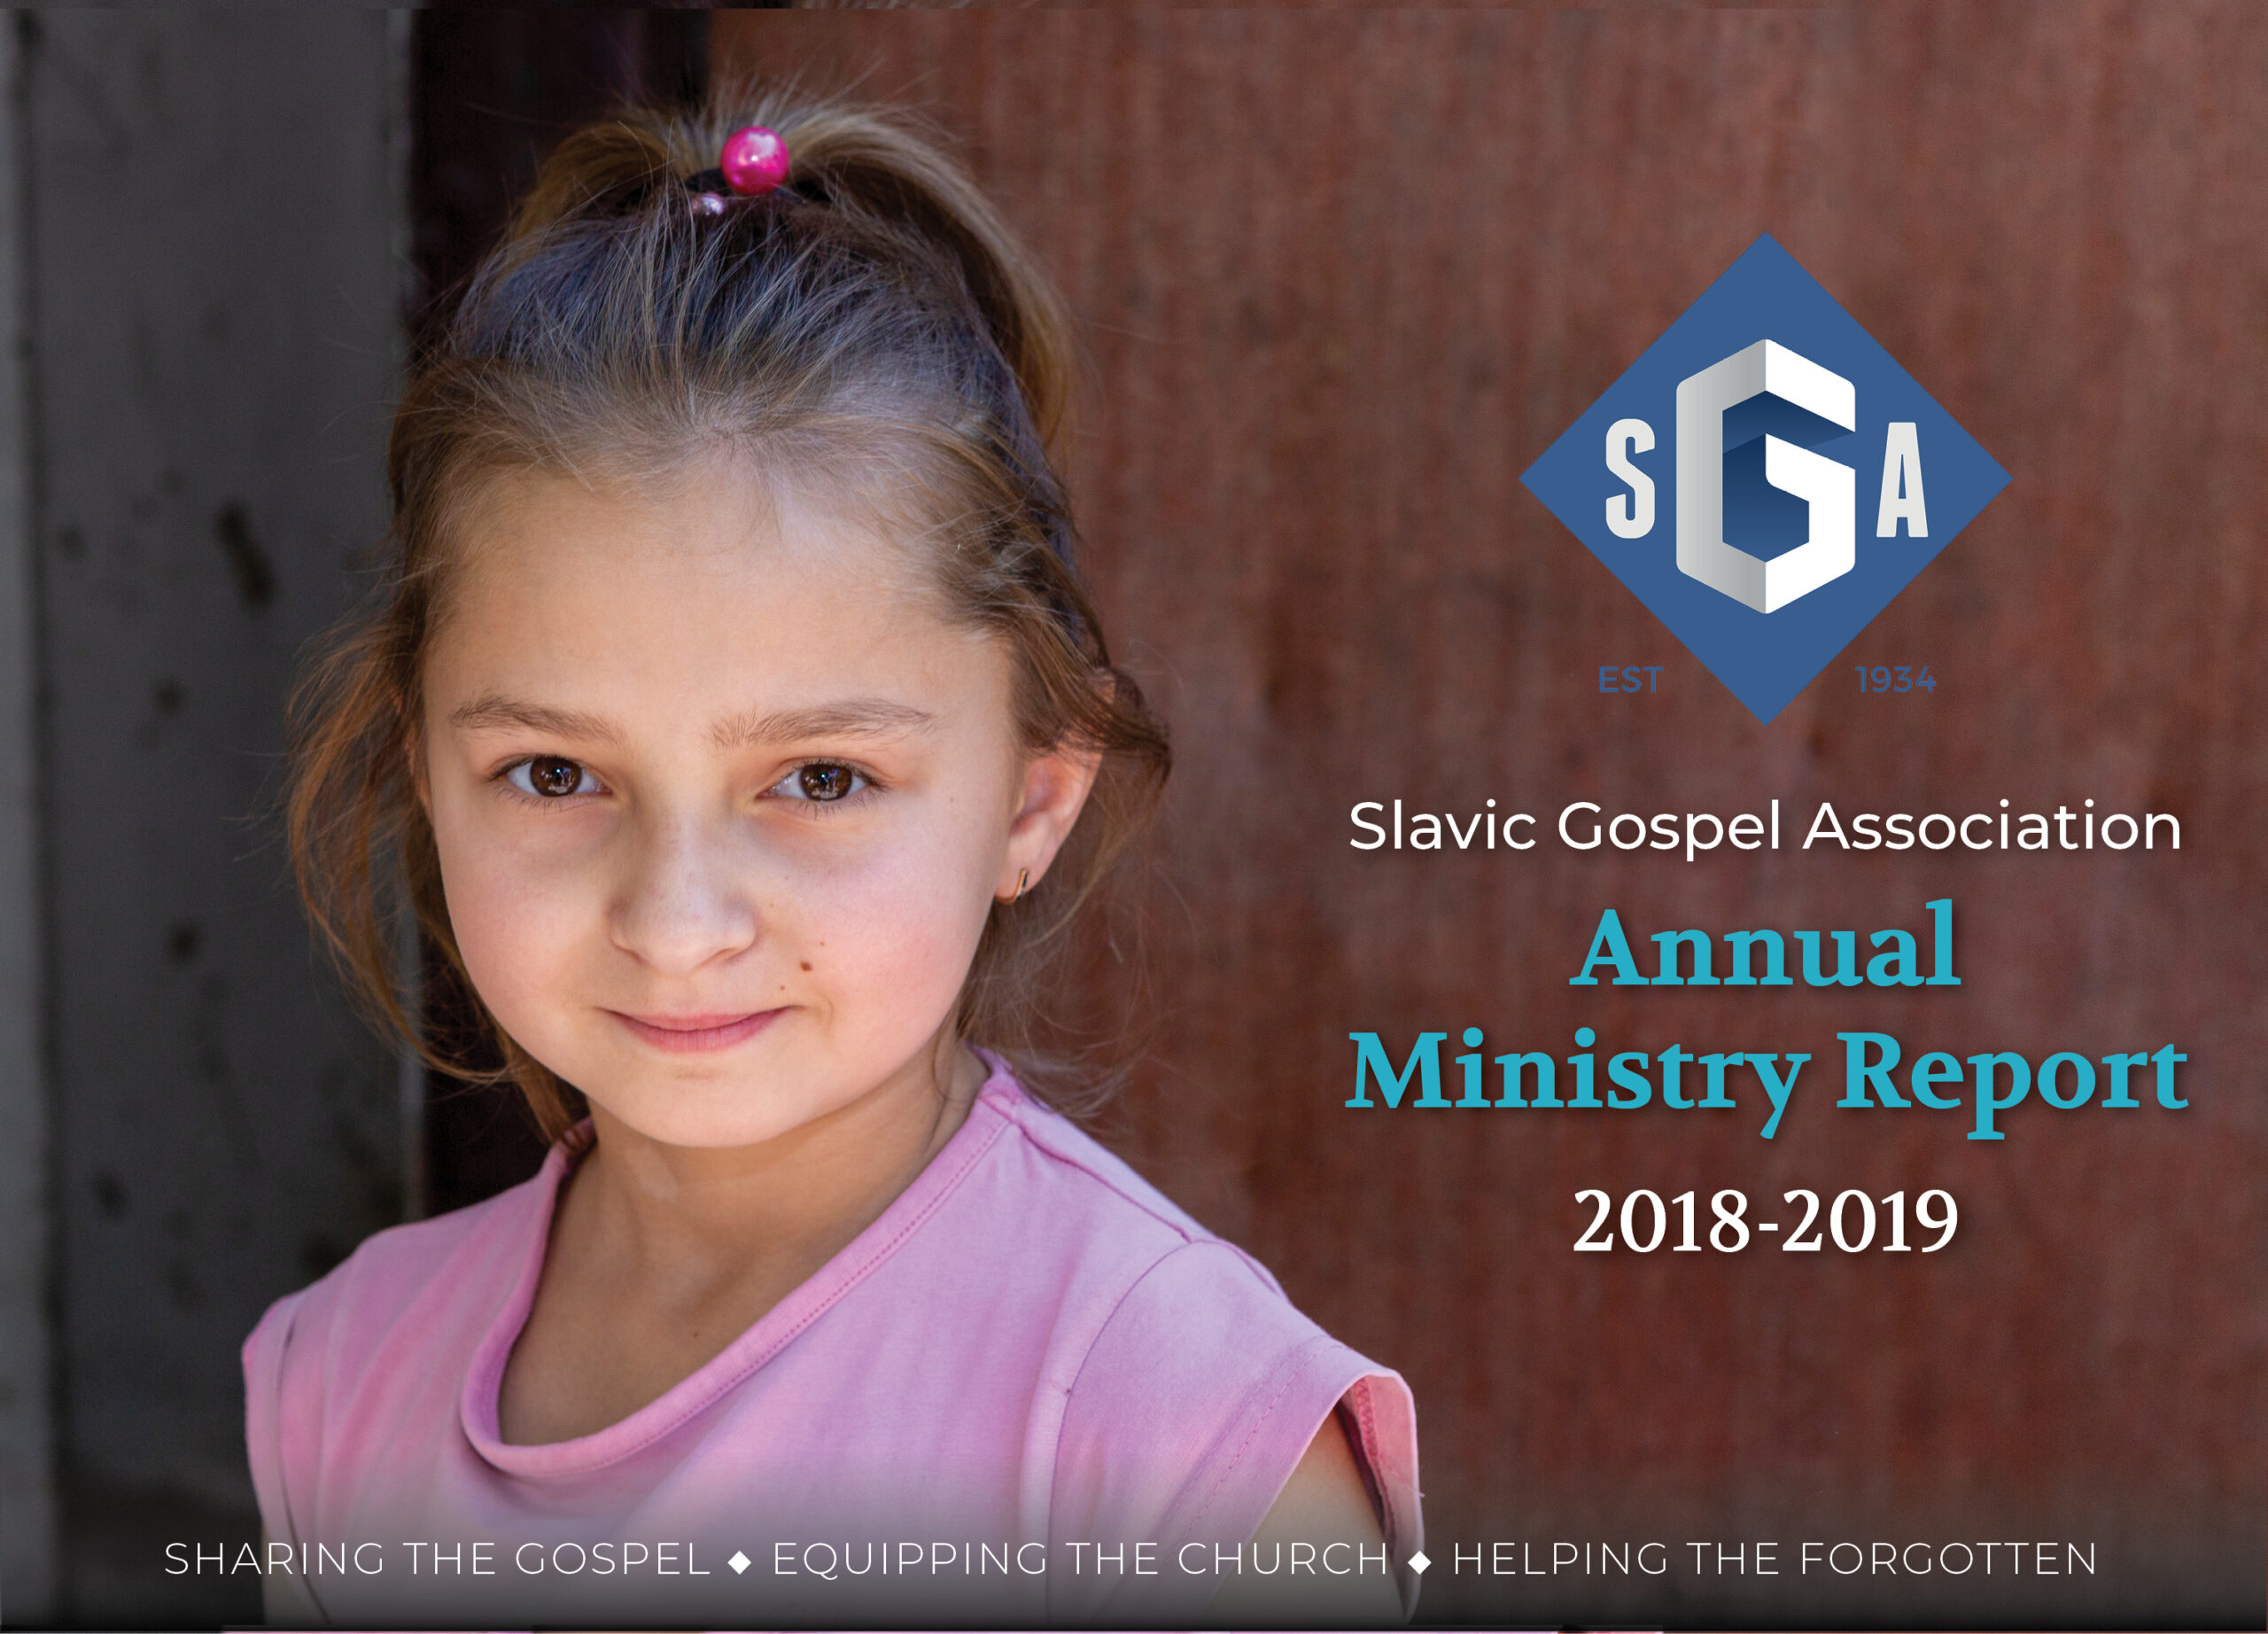 2019 Annual Ministry Report